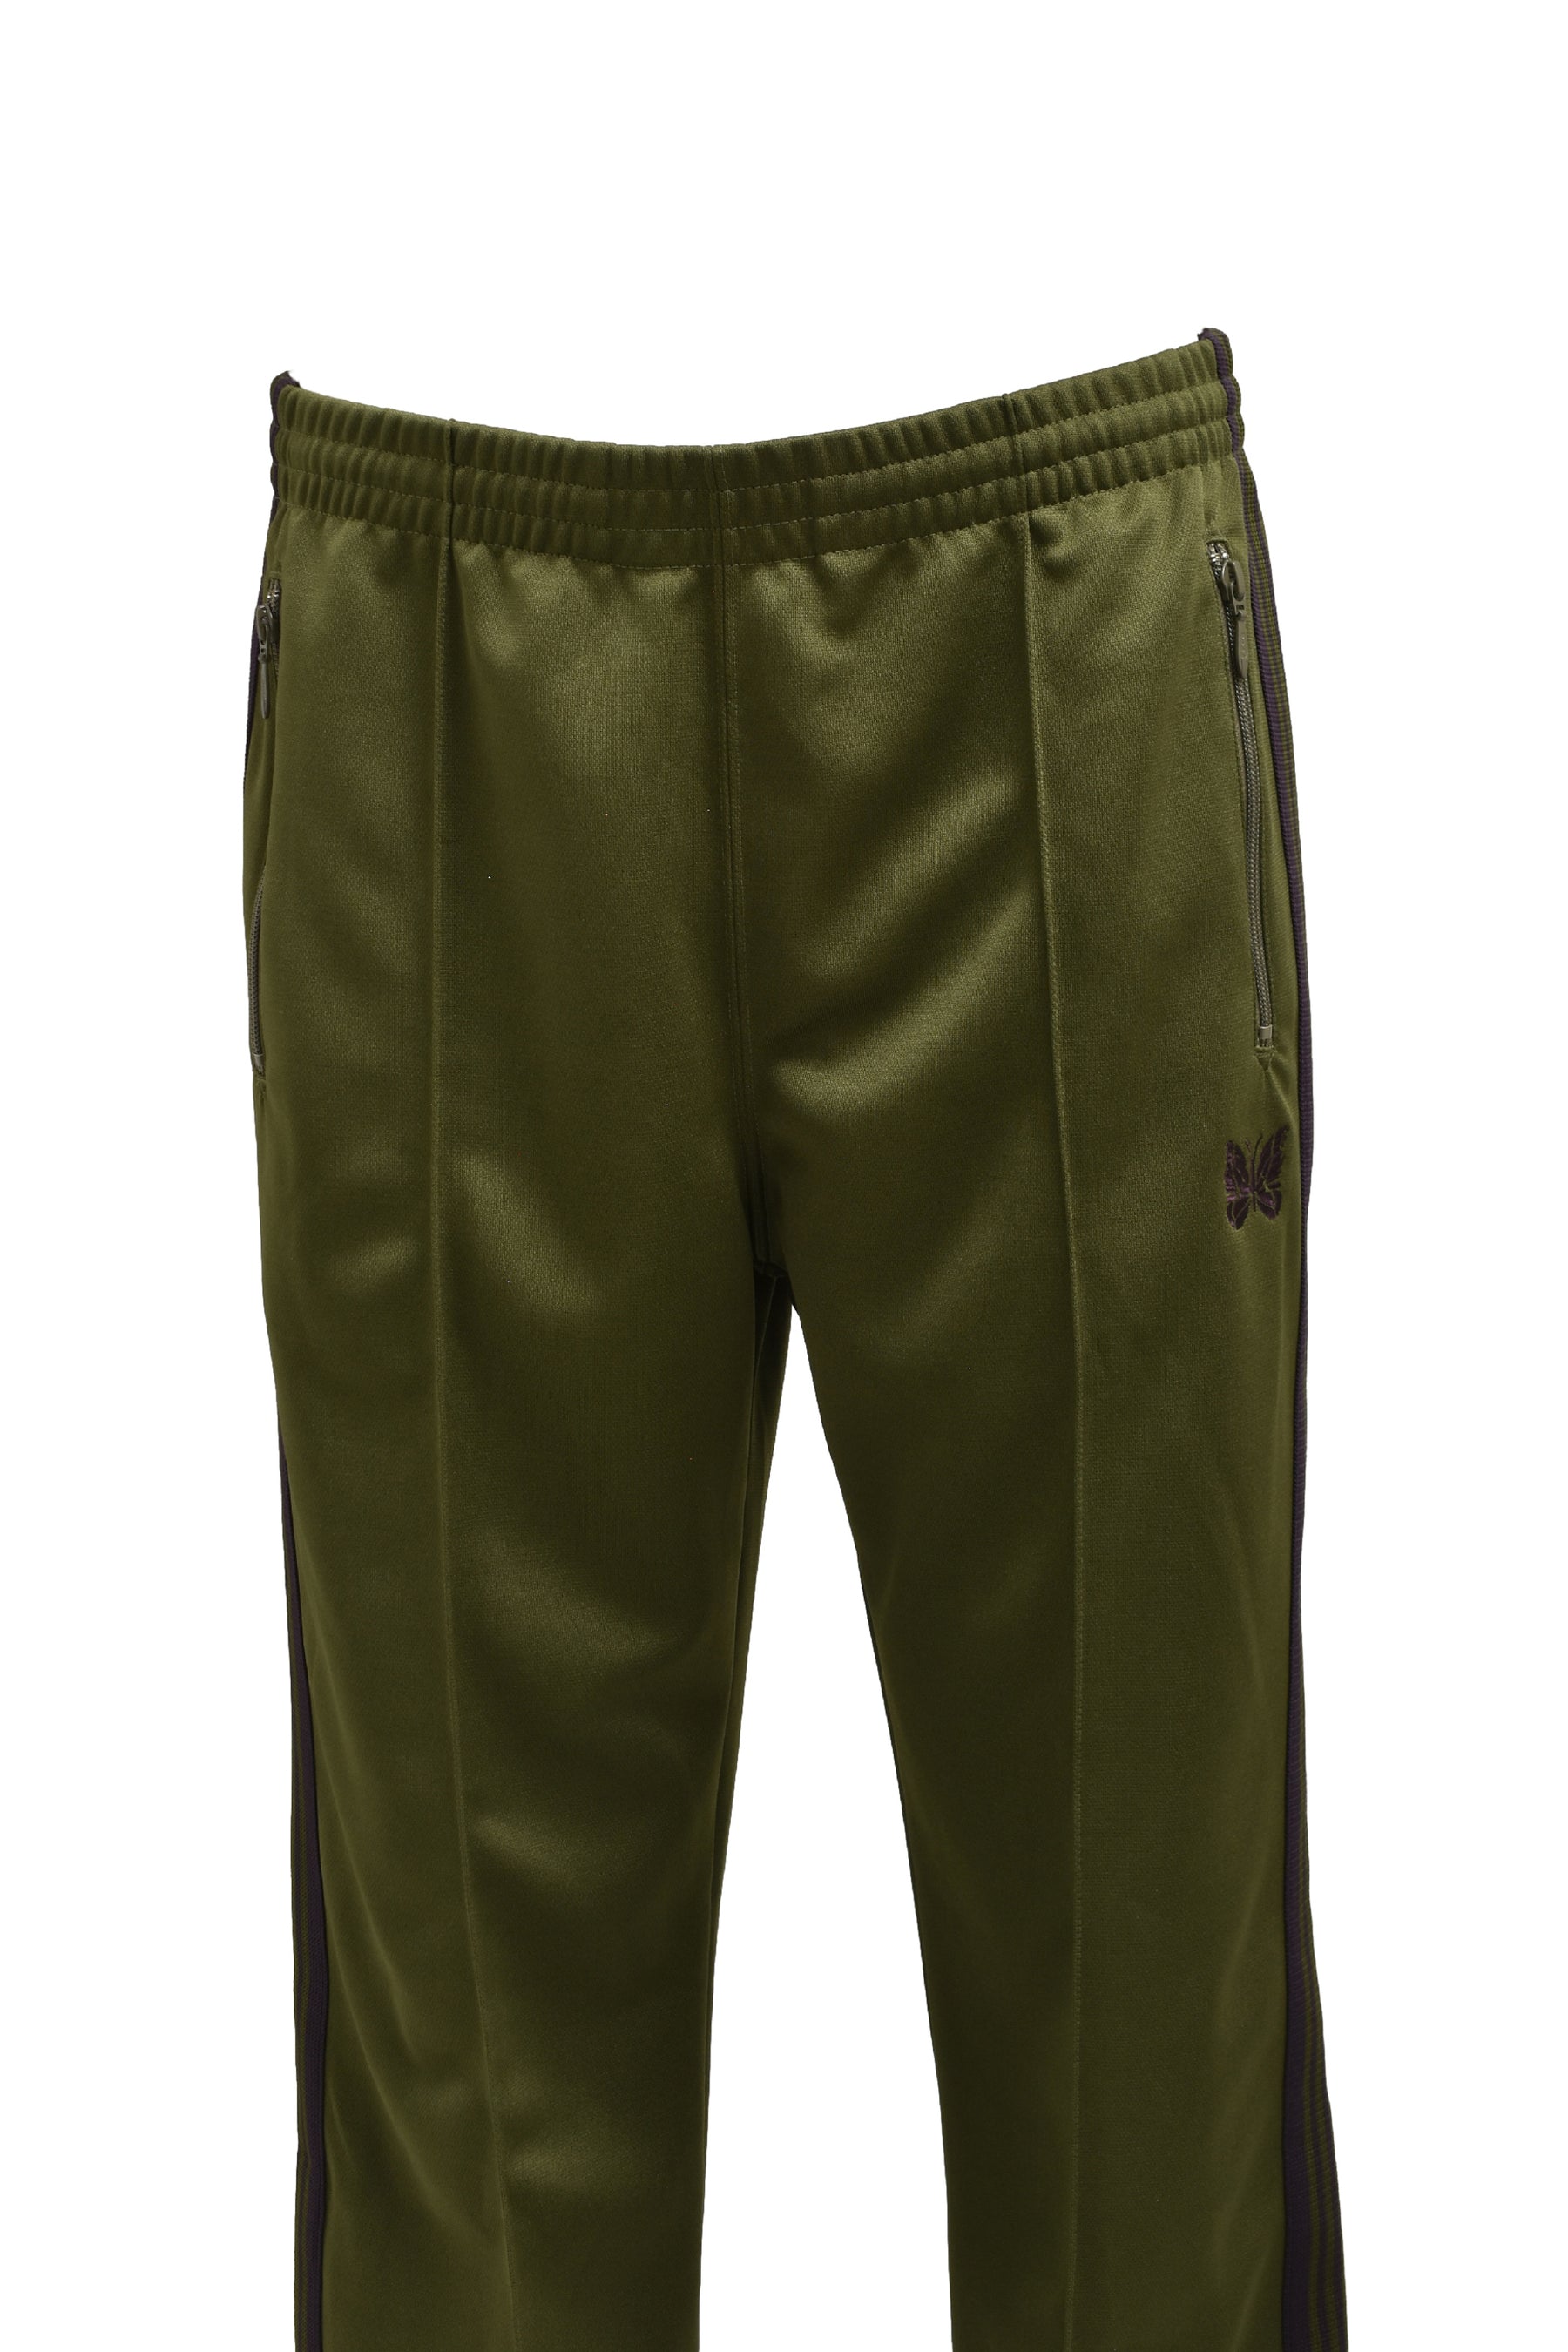 TRACK PANT - POLY SMOOTH / OLV